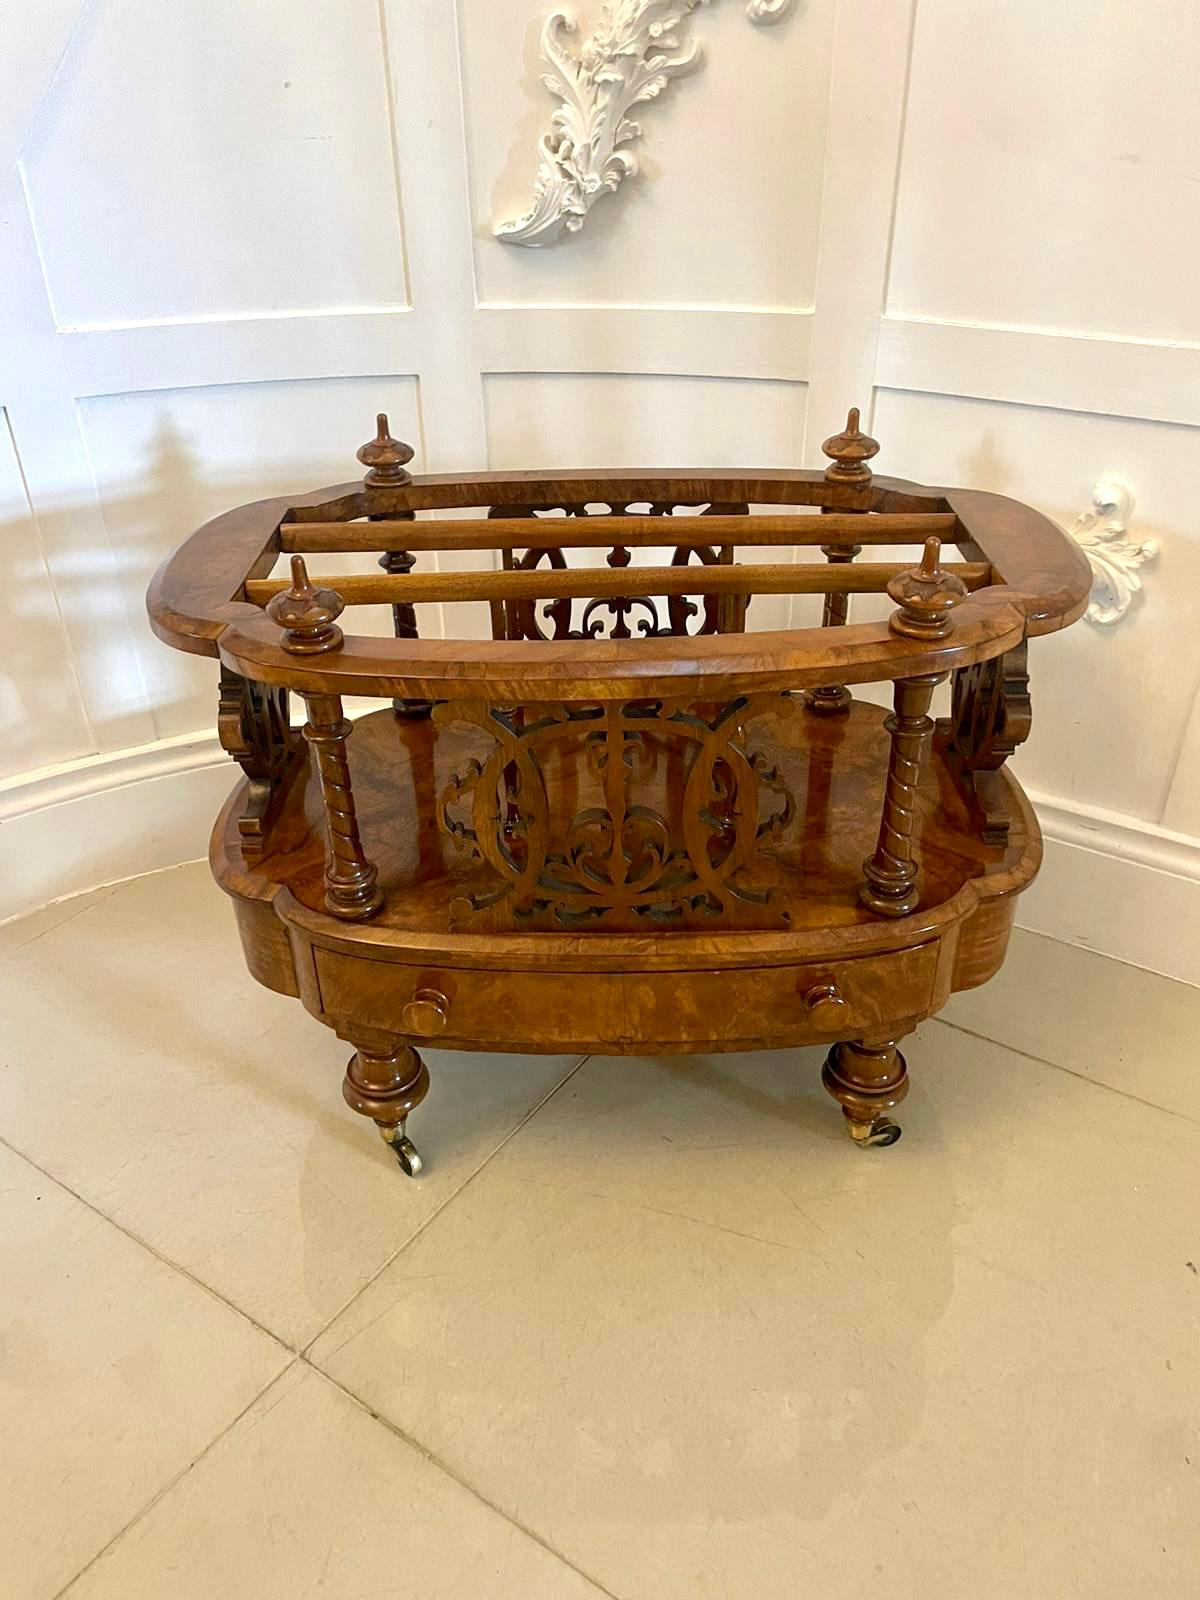 Outstanding quality antique Victorian burr walnut freestanding Canterbury having an outstanding quality burr walnut shaped top with carved finials supported by solid walnut fret carved sides and dividers, one drawer to the base with original turned